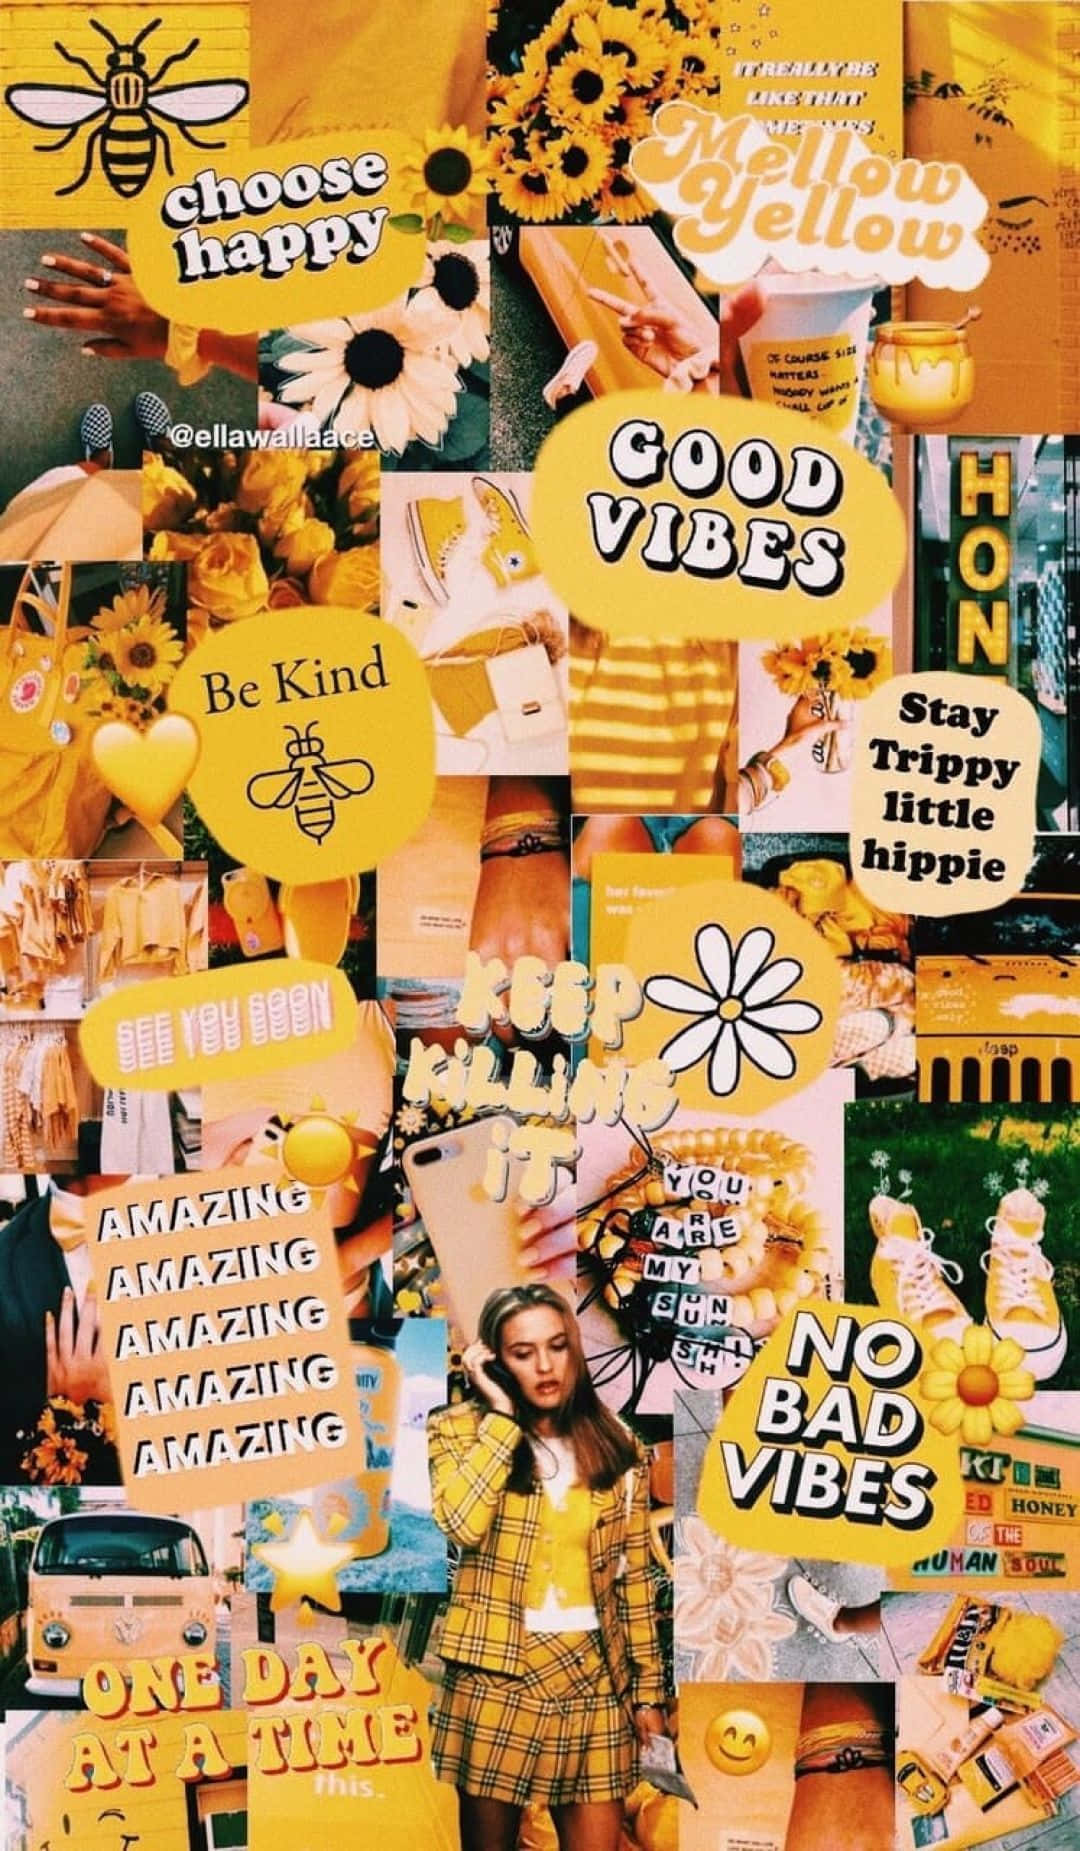 Iphone Collage Of Yellow Images With Sayings Wallpaper